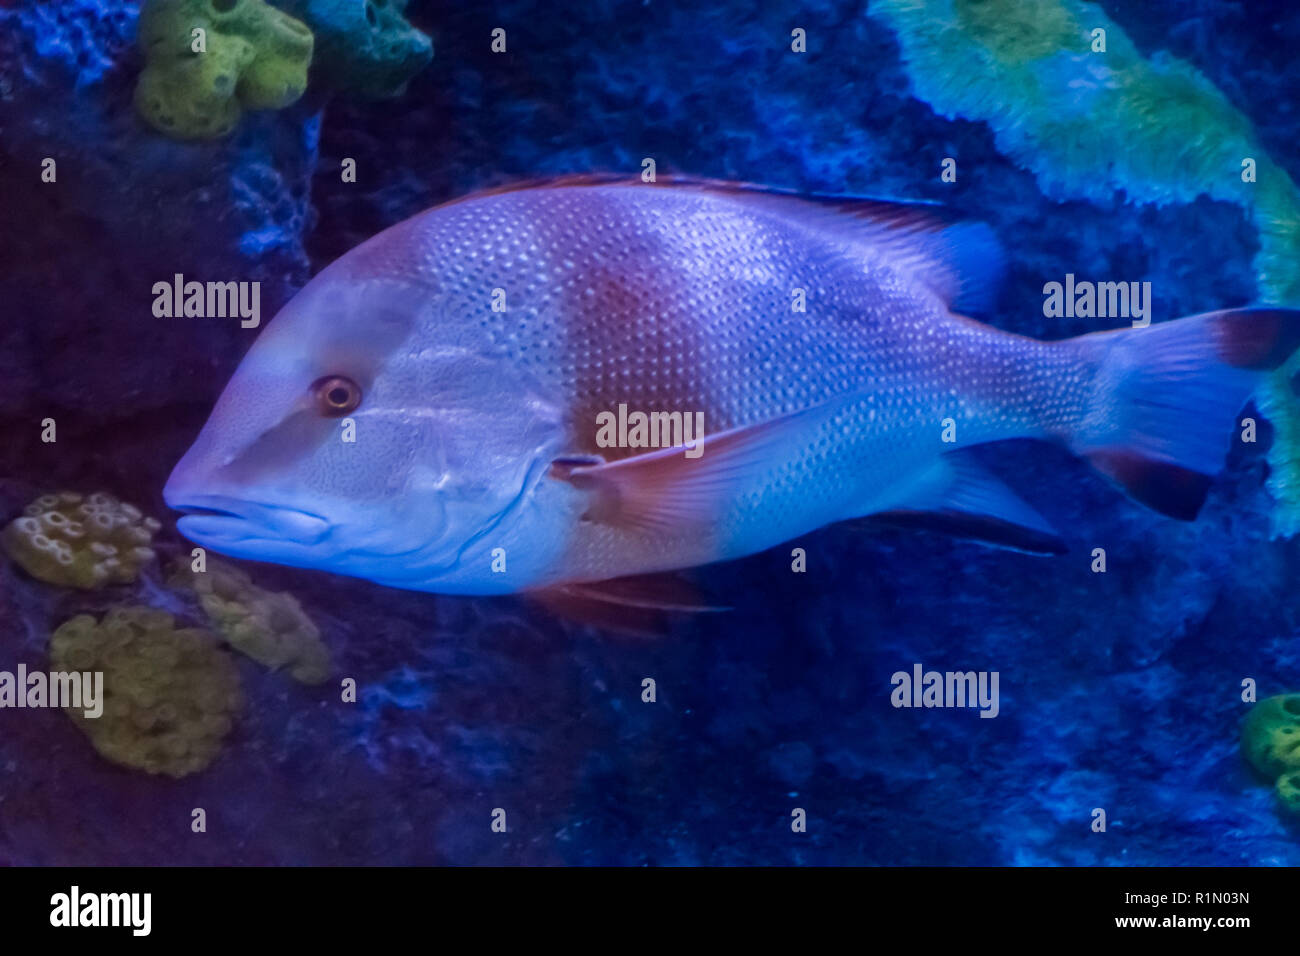 young adult red emperor snapper a tropical aquarium fish from the pacific ocean Stock Photo